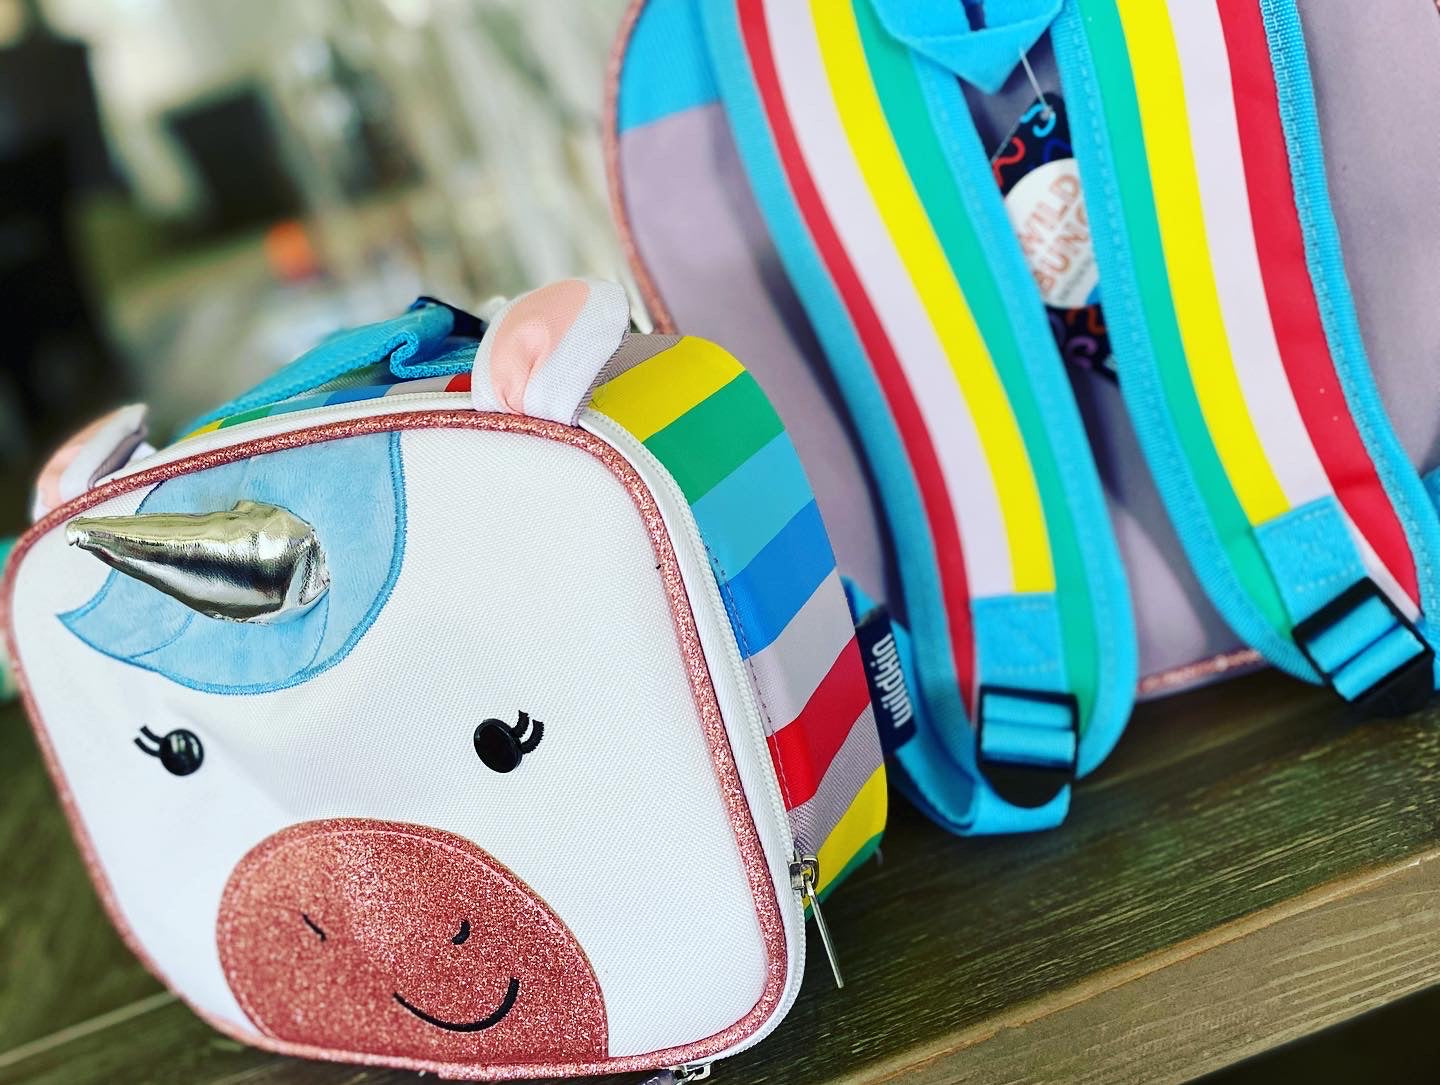 Wild bunch toddler size unicorn back pack